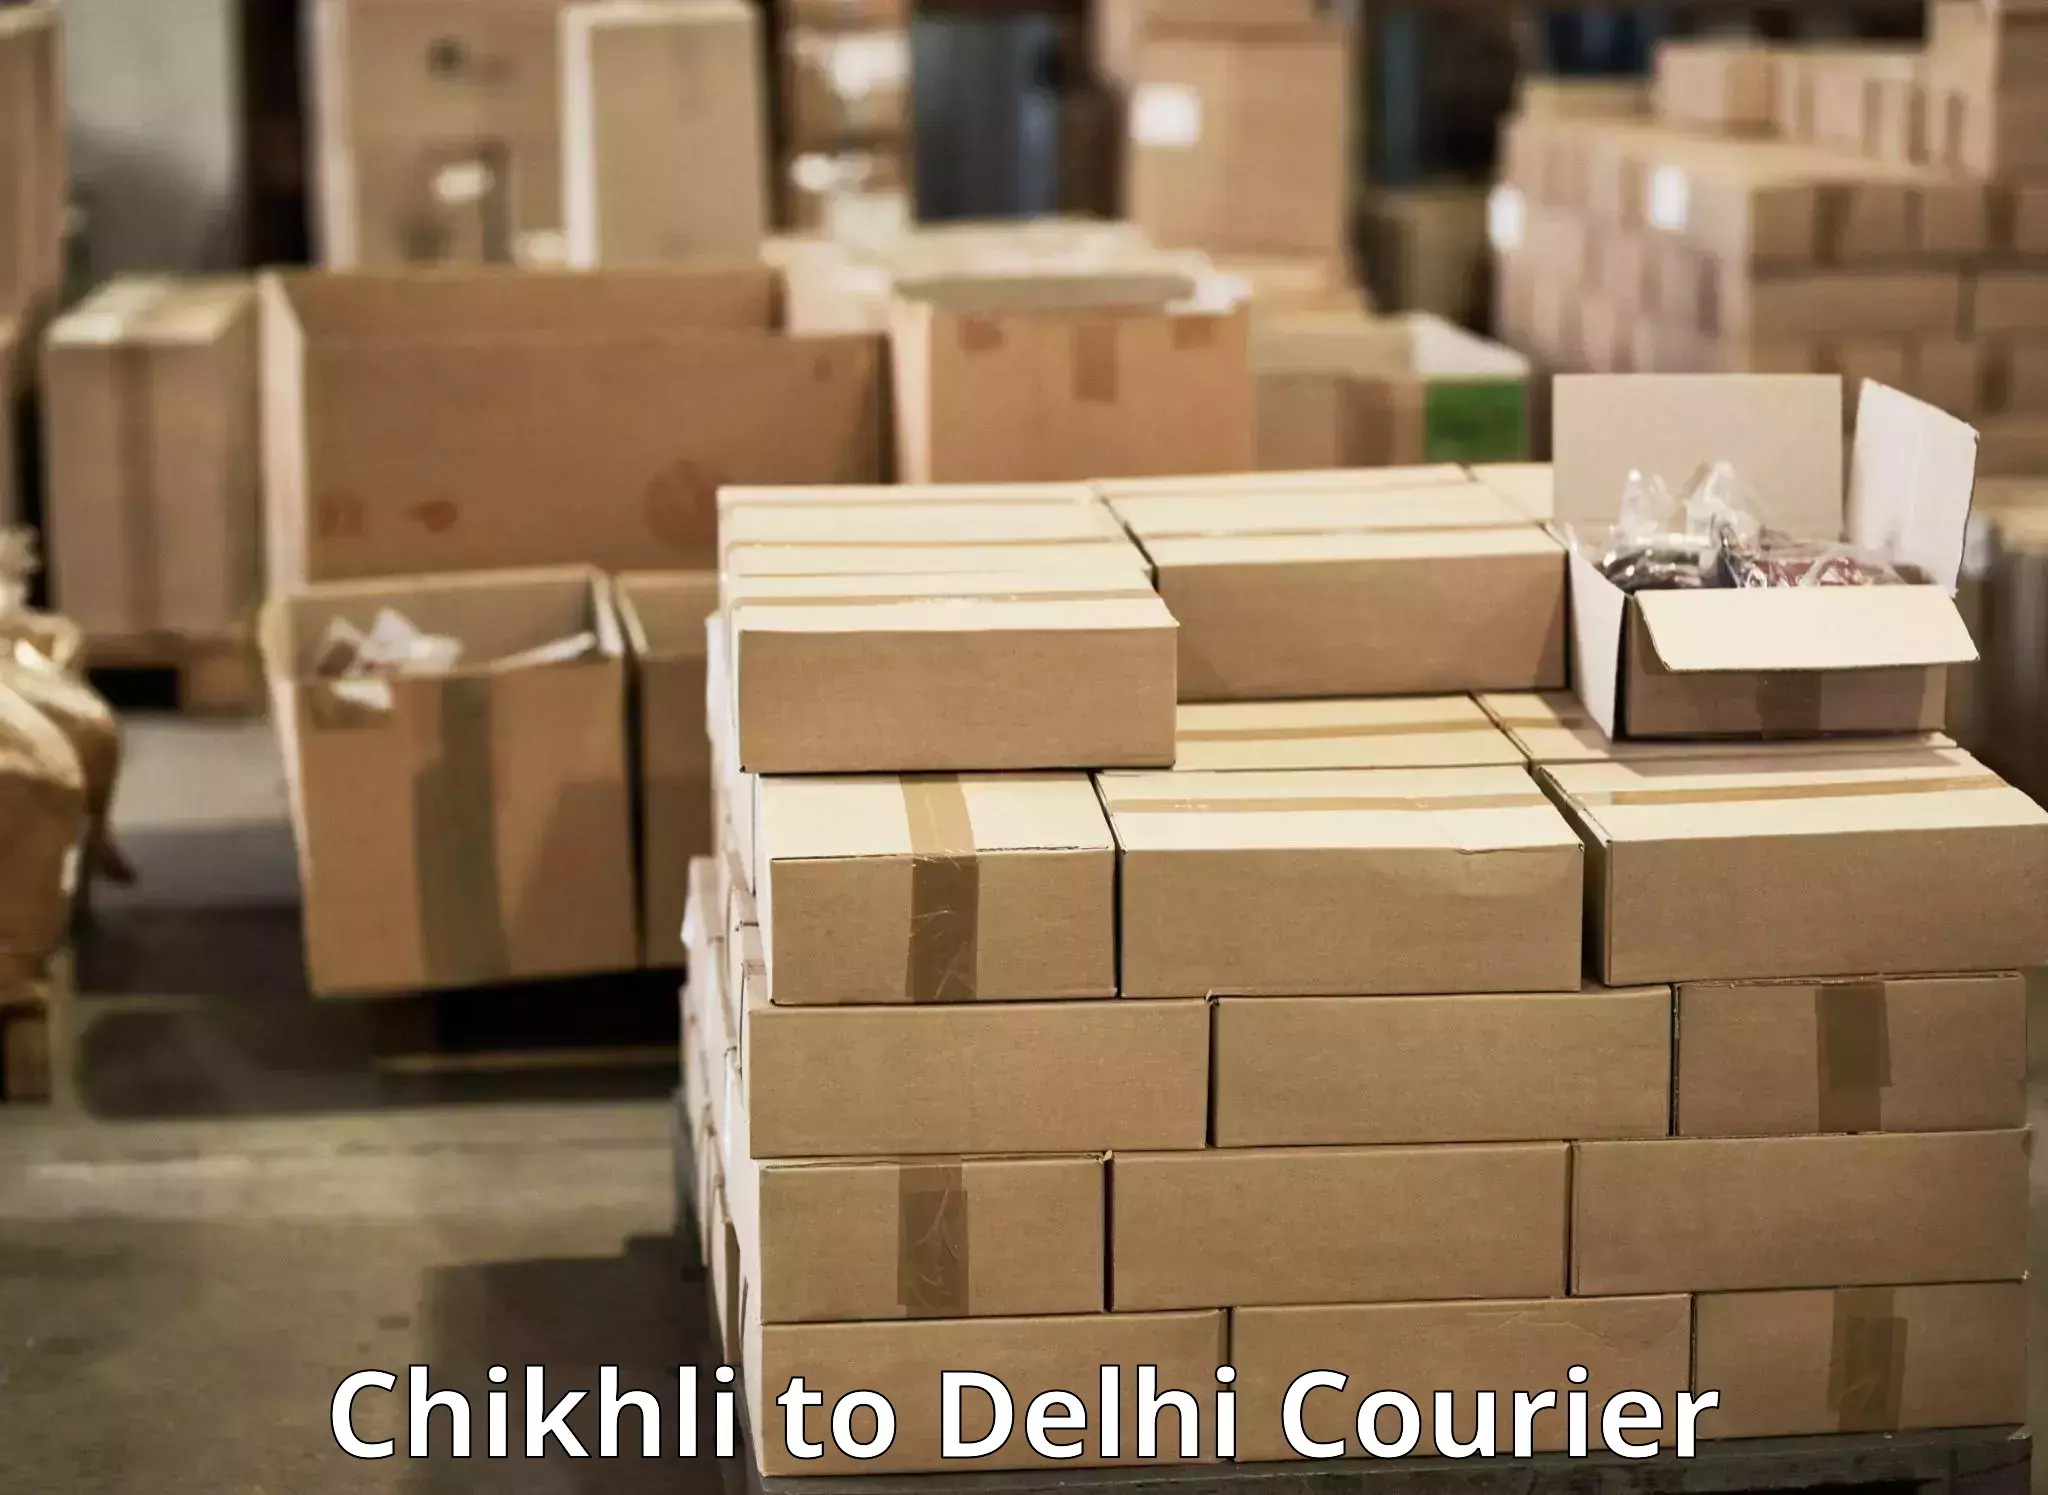 Nationwide delivery network Chikhli to East Delhi